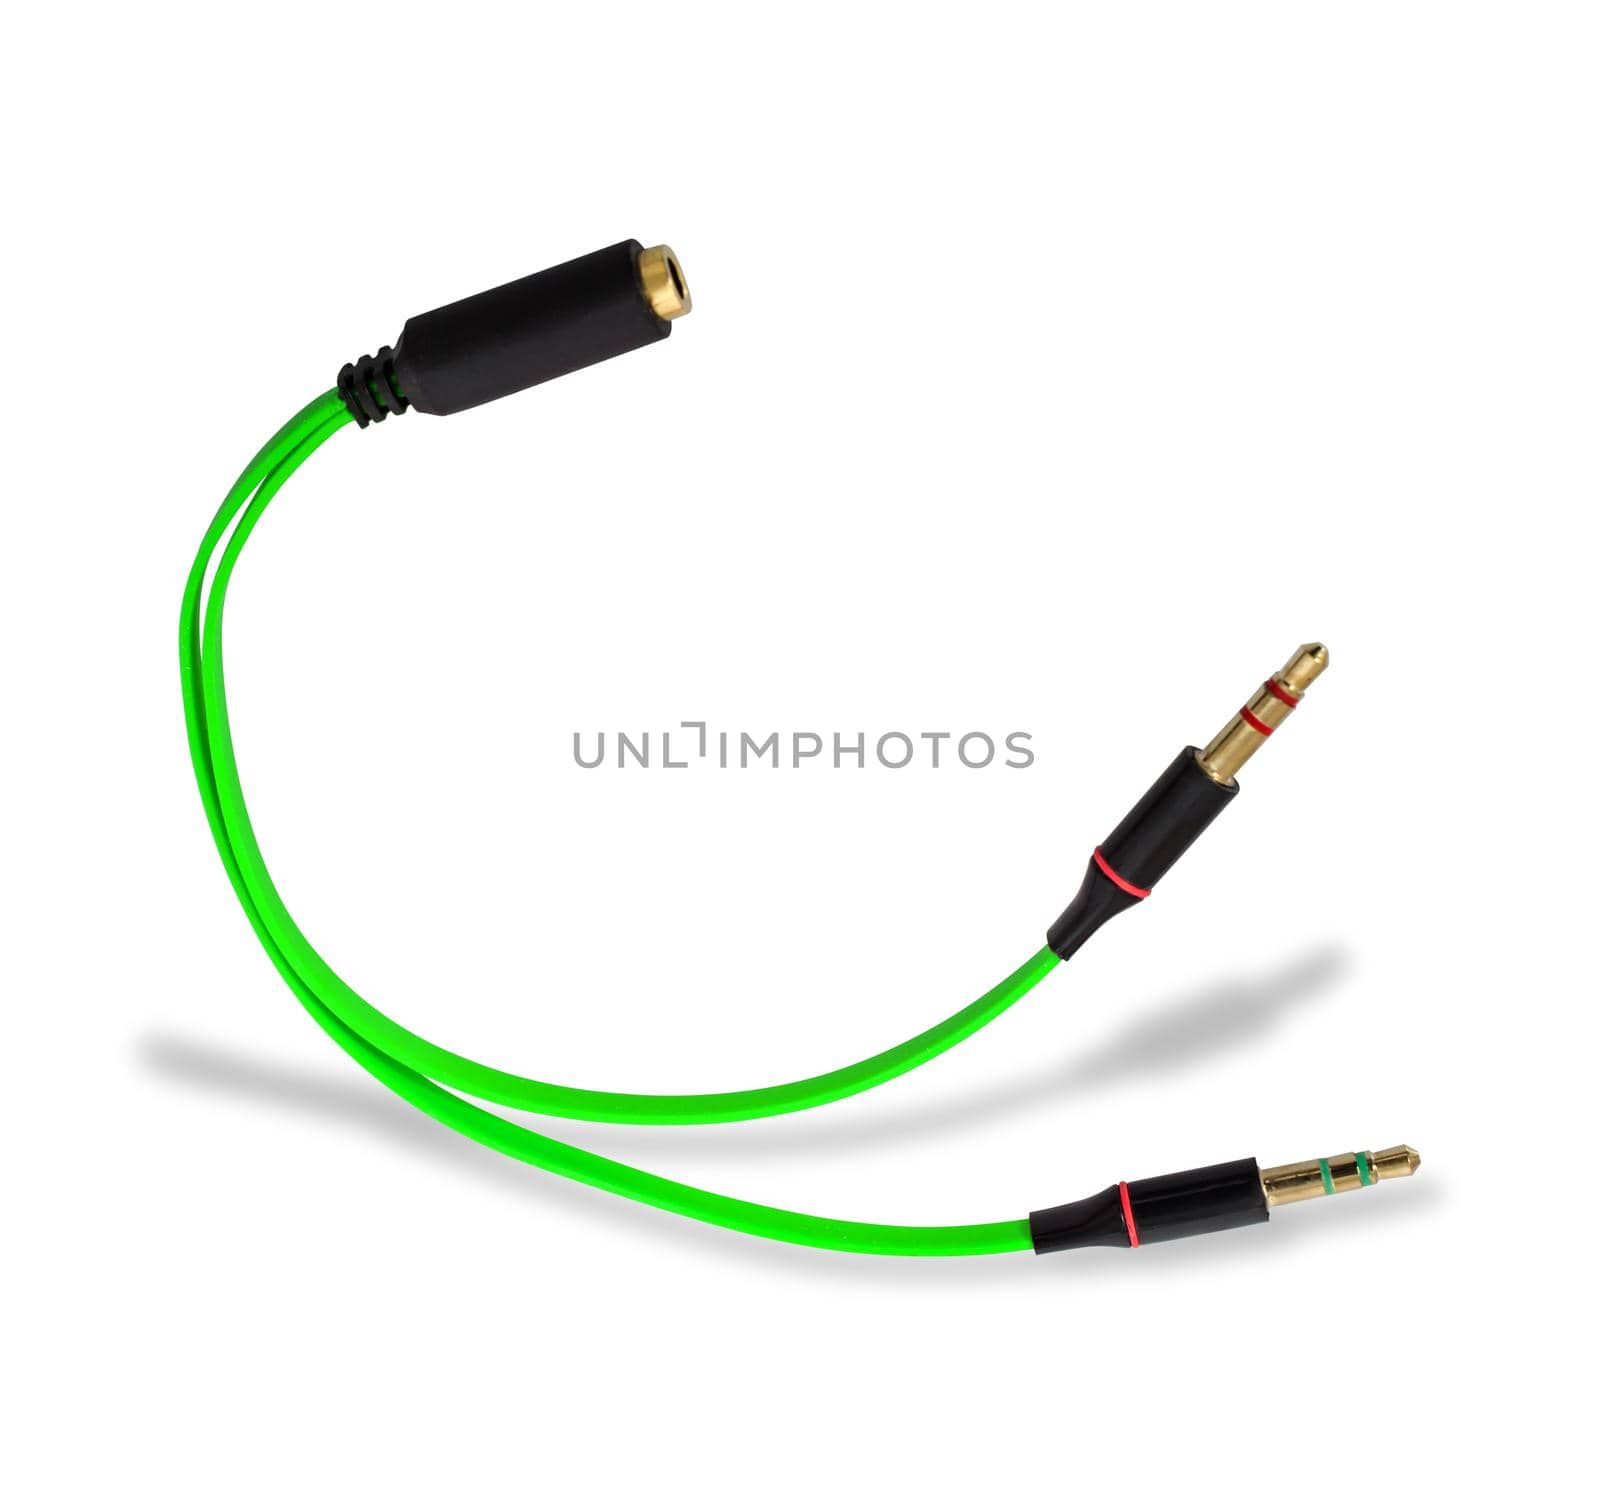 audio cable, adapter cord, on white background with shadow by A_A